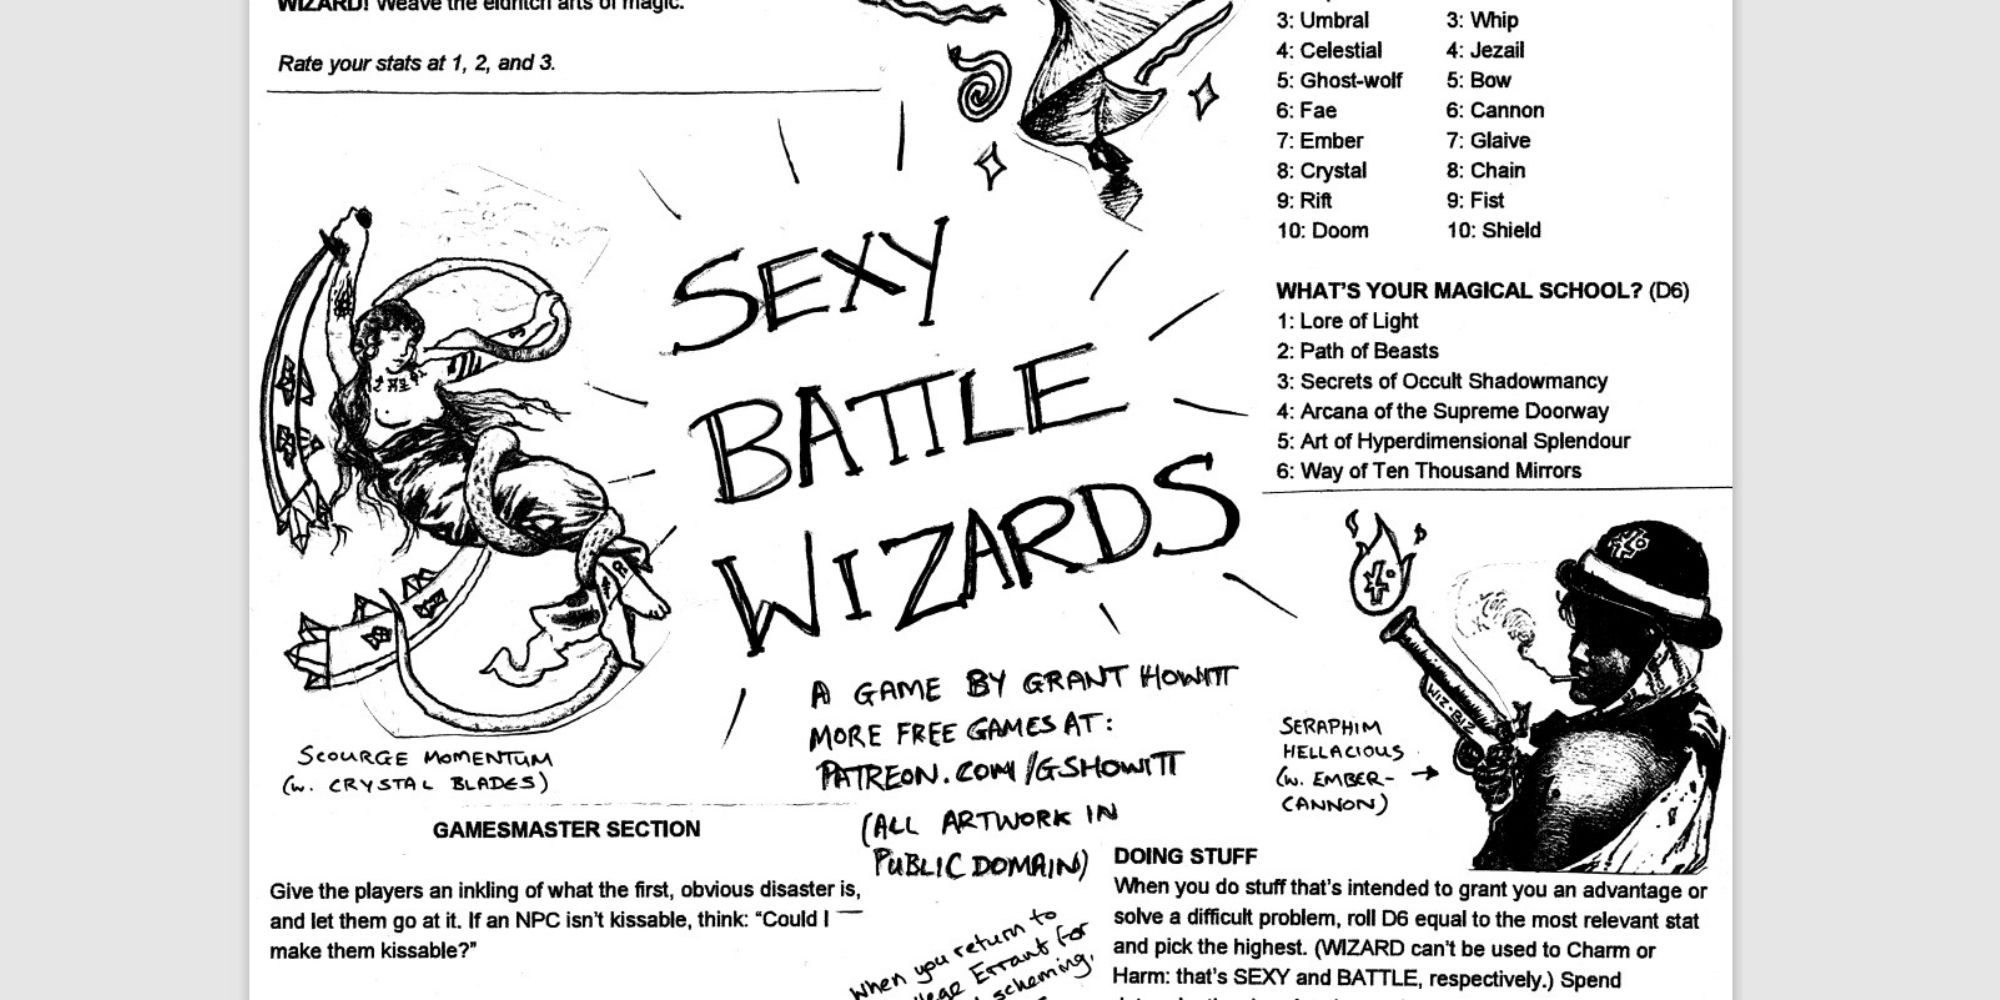 Sexy Battle Wizards with doodles of characters